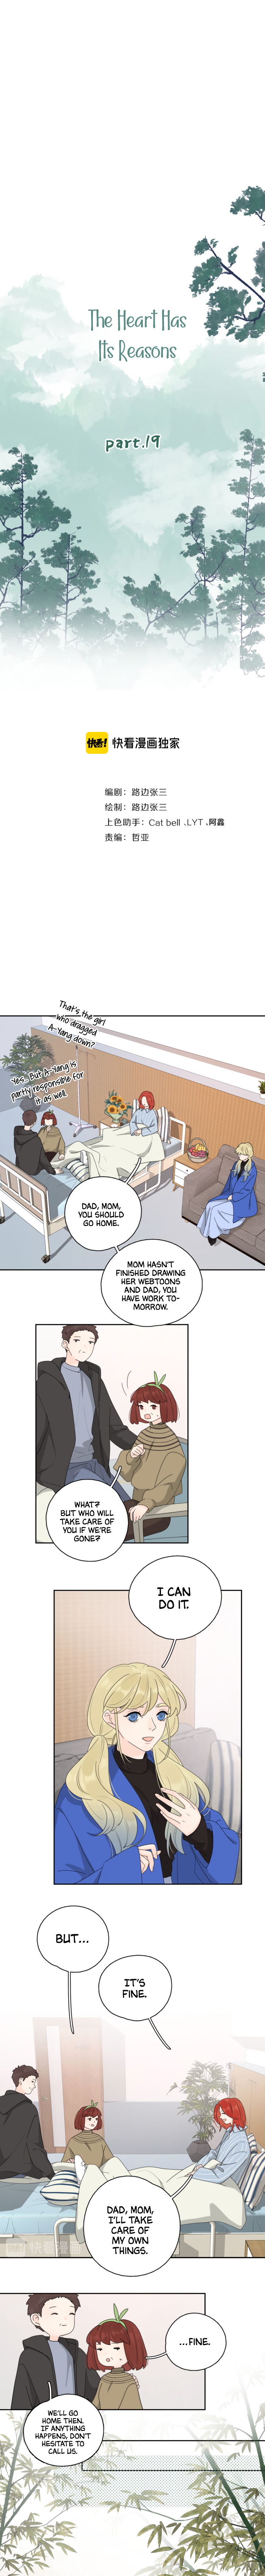 The Looks Of Love: The Heart Has Its Reasons Chapter 59 - Vol. 2 Ch. 19 - The Misunderstanding Deepens - Picture 1